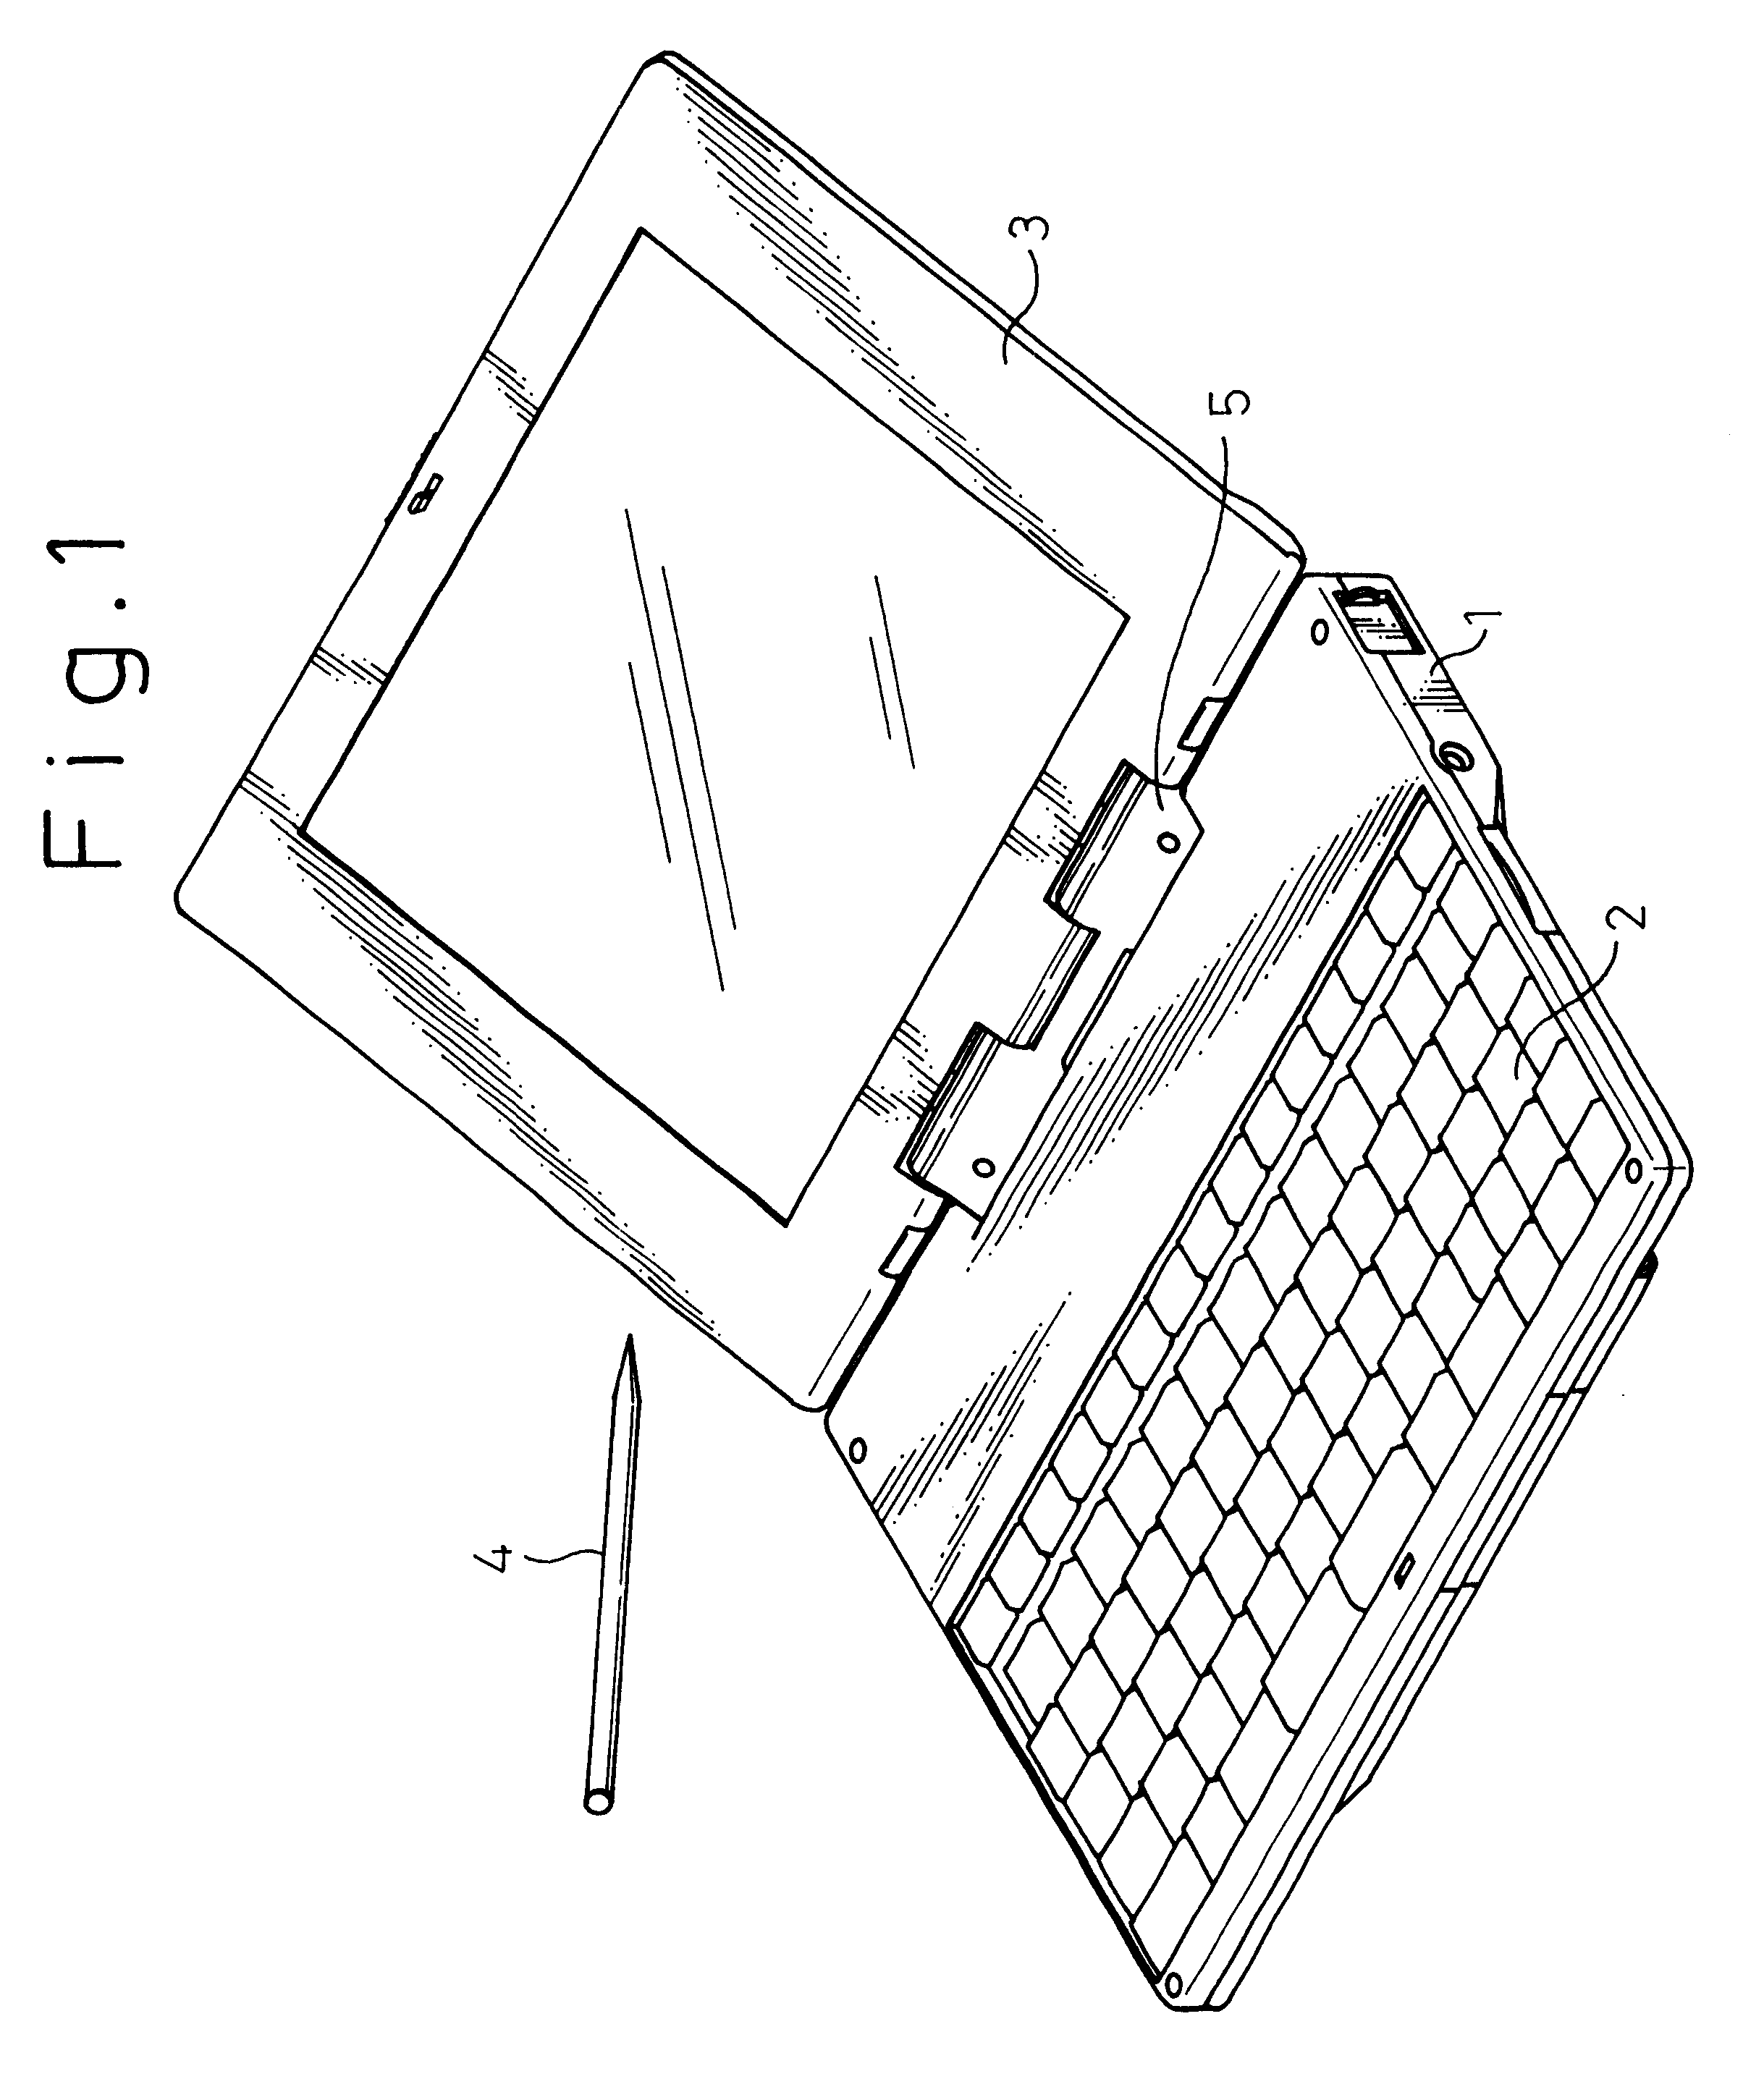 Small-sized portable information processing apparatus